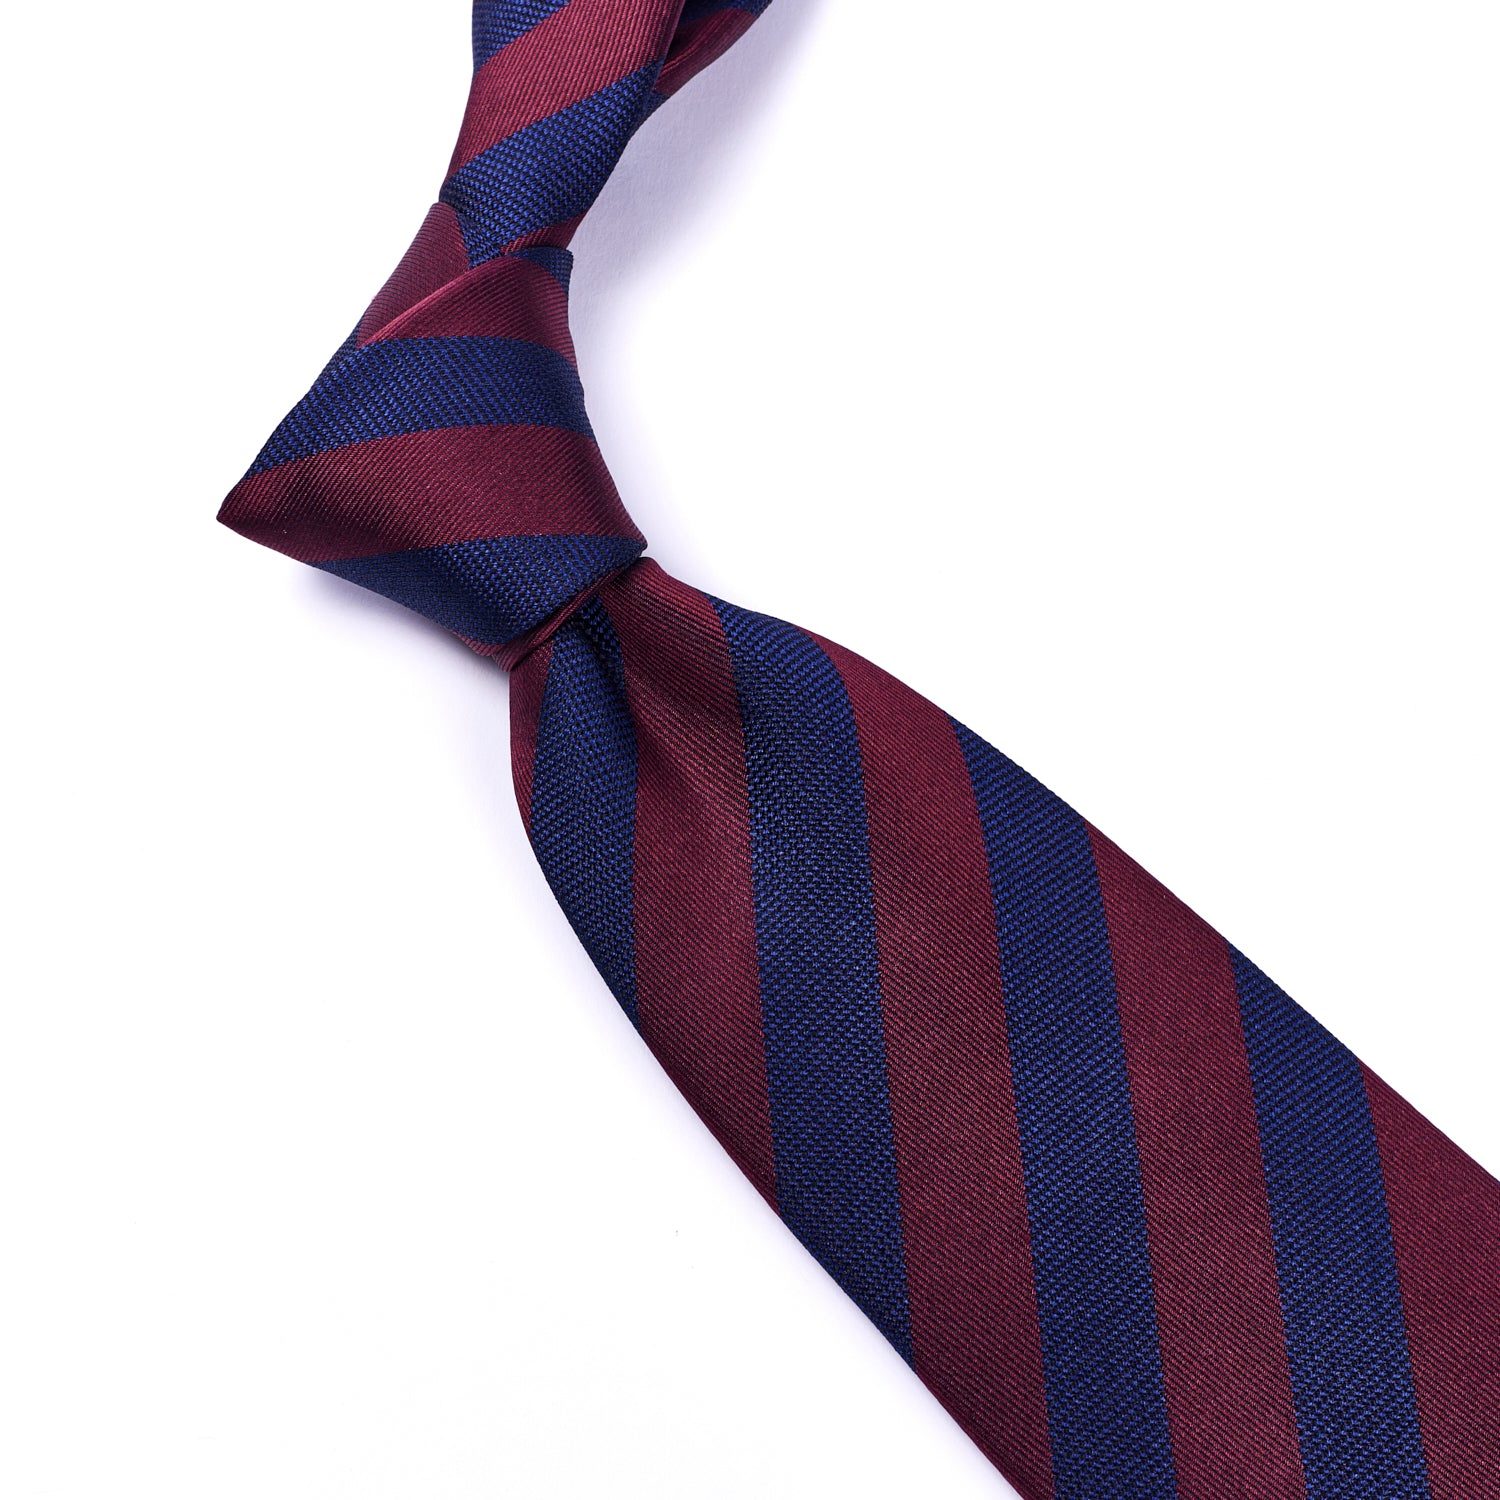 A Sovereign Grade Woven Navy and Burgundy Rep Tie, 150 cm on a white background, available at KirbyAllison.com.